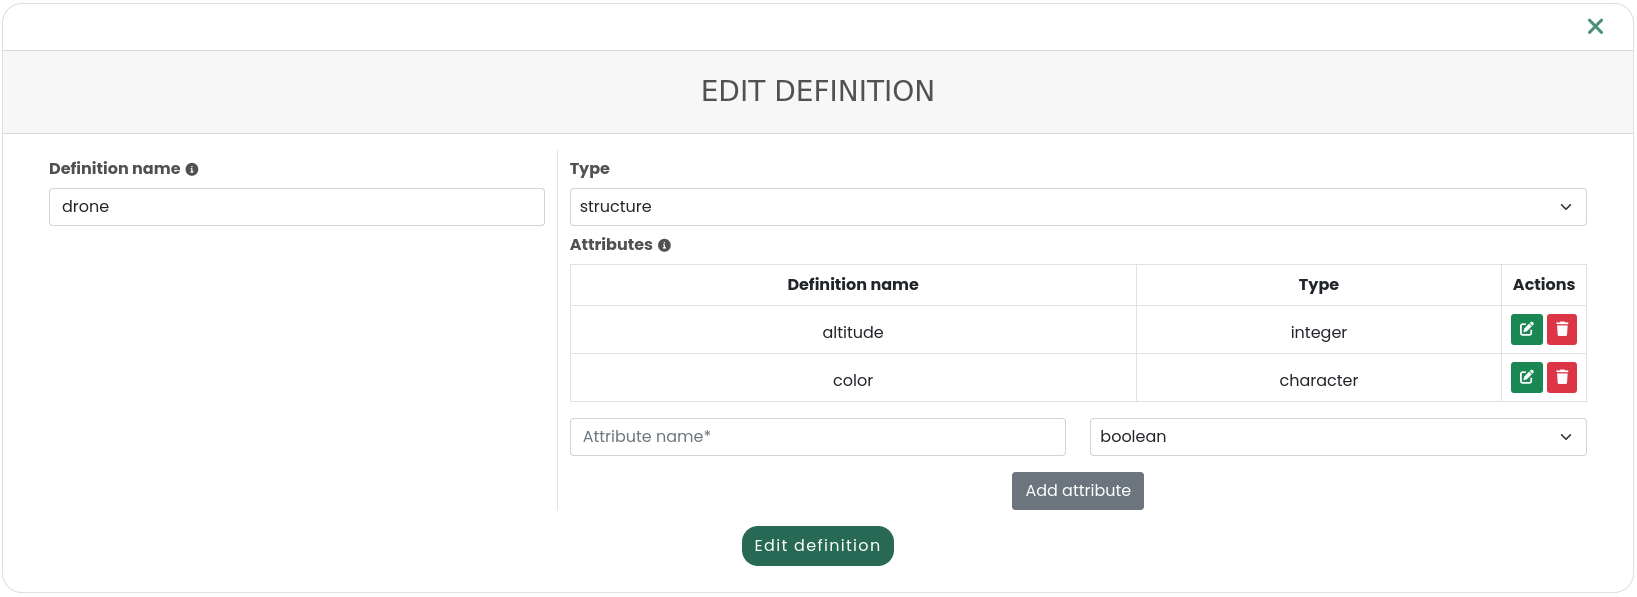 Structure definition contains elements defined with a type